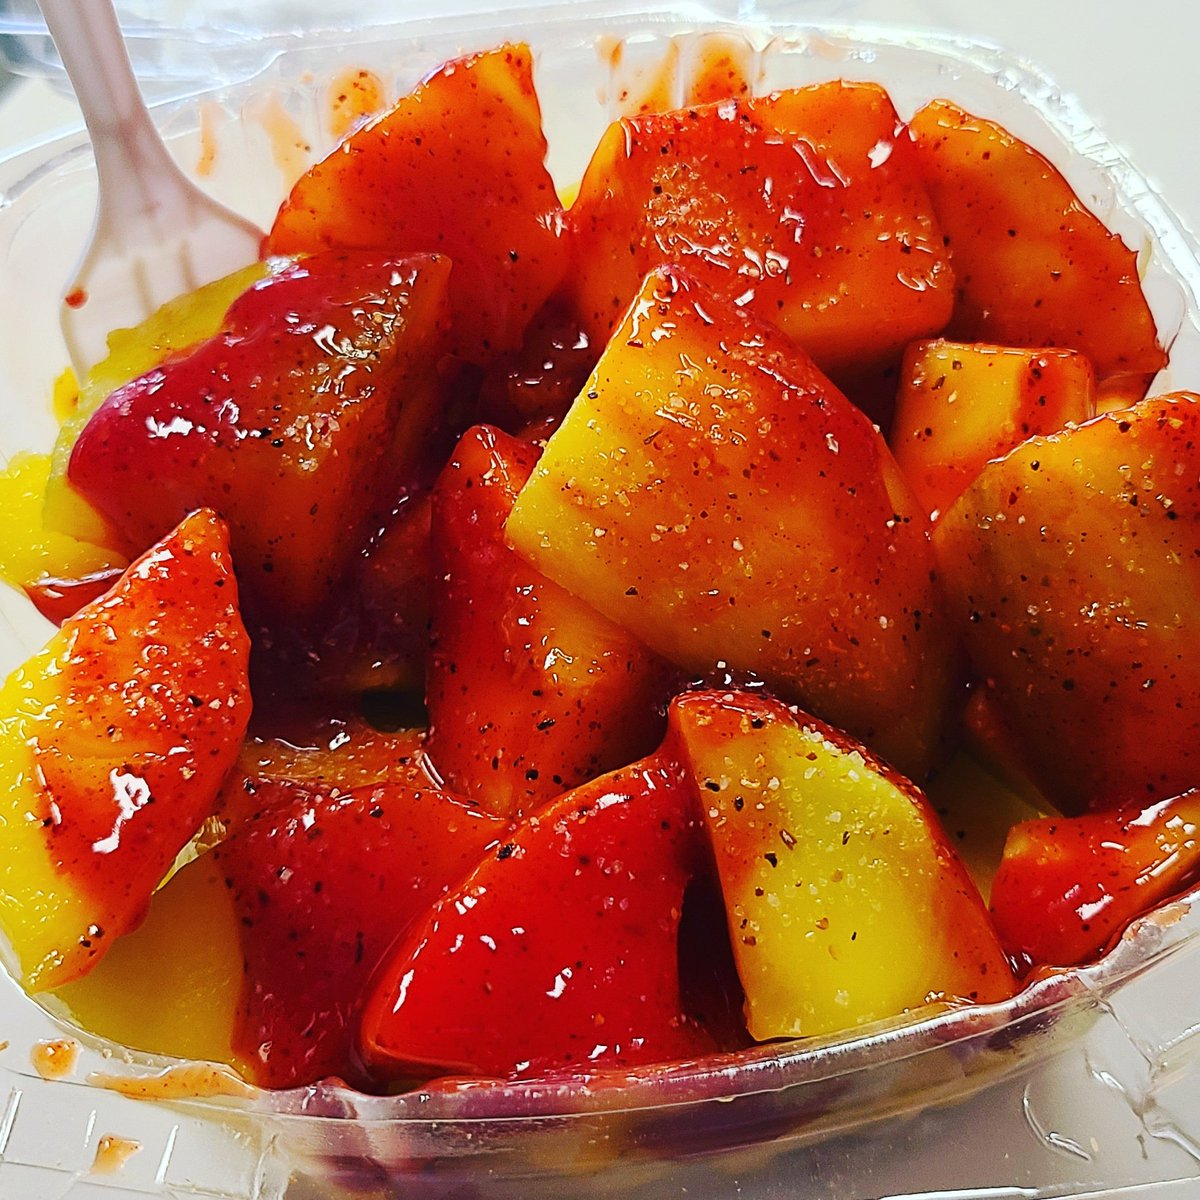 A little snack at work 😋 🥭

#Mango #Chamoy #MexicanProblems